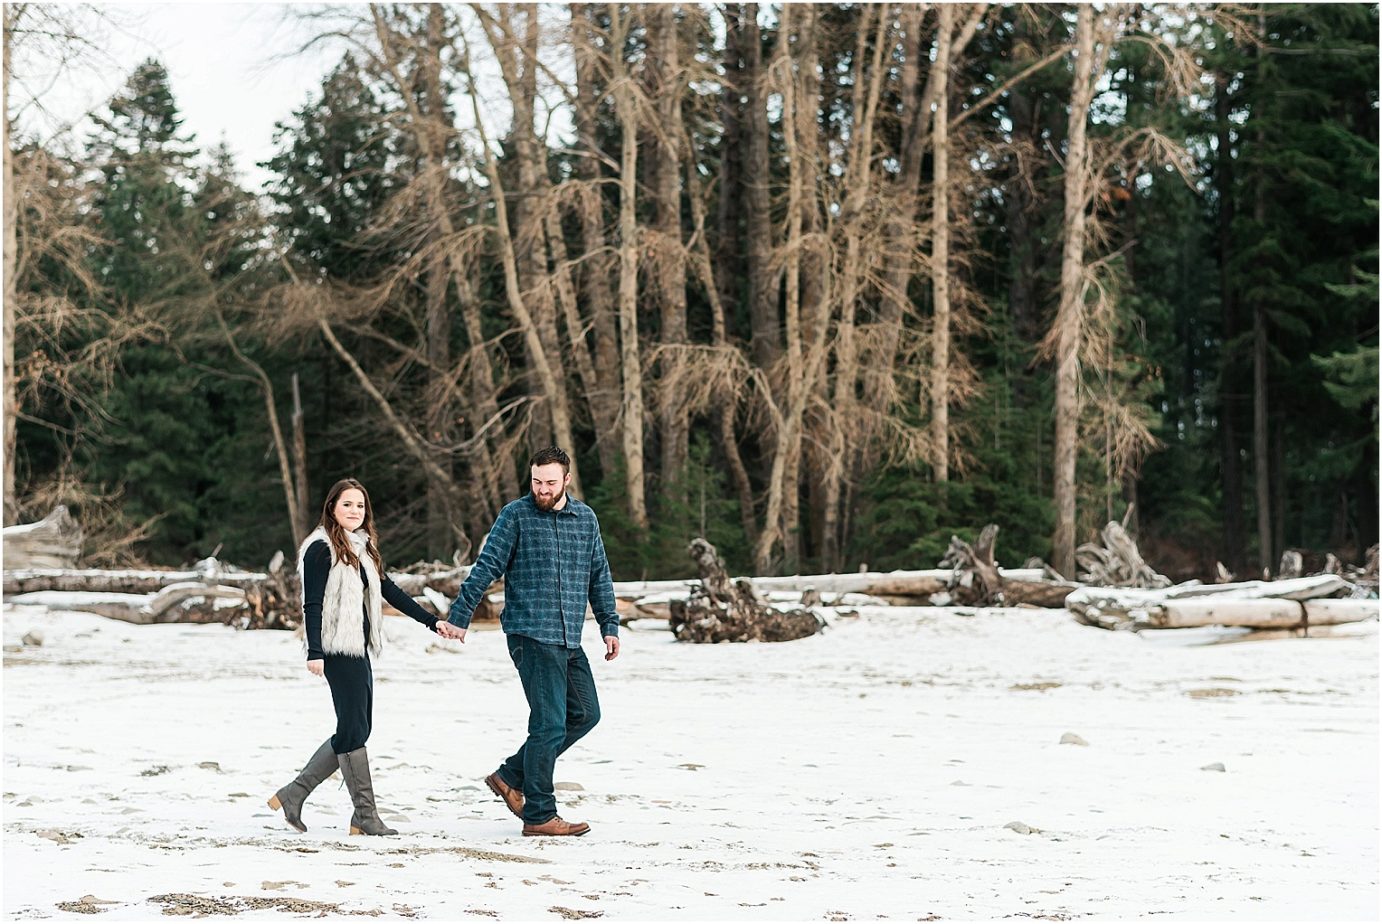 Lake Cle Elum Engagement Session Cle Elum WA Andrew and Stella walking by the lake